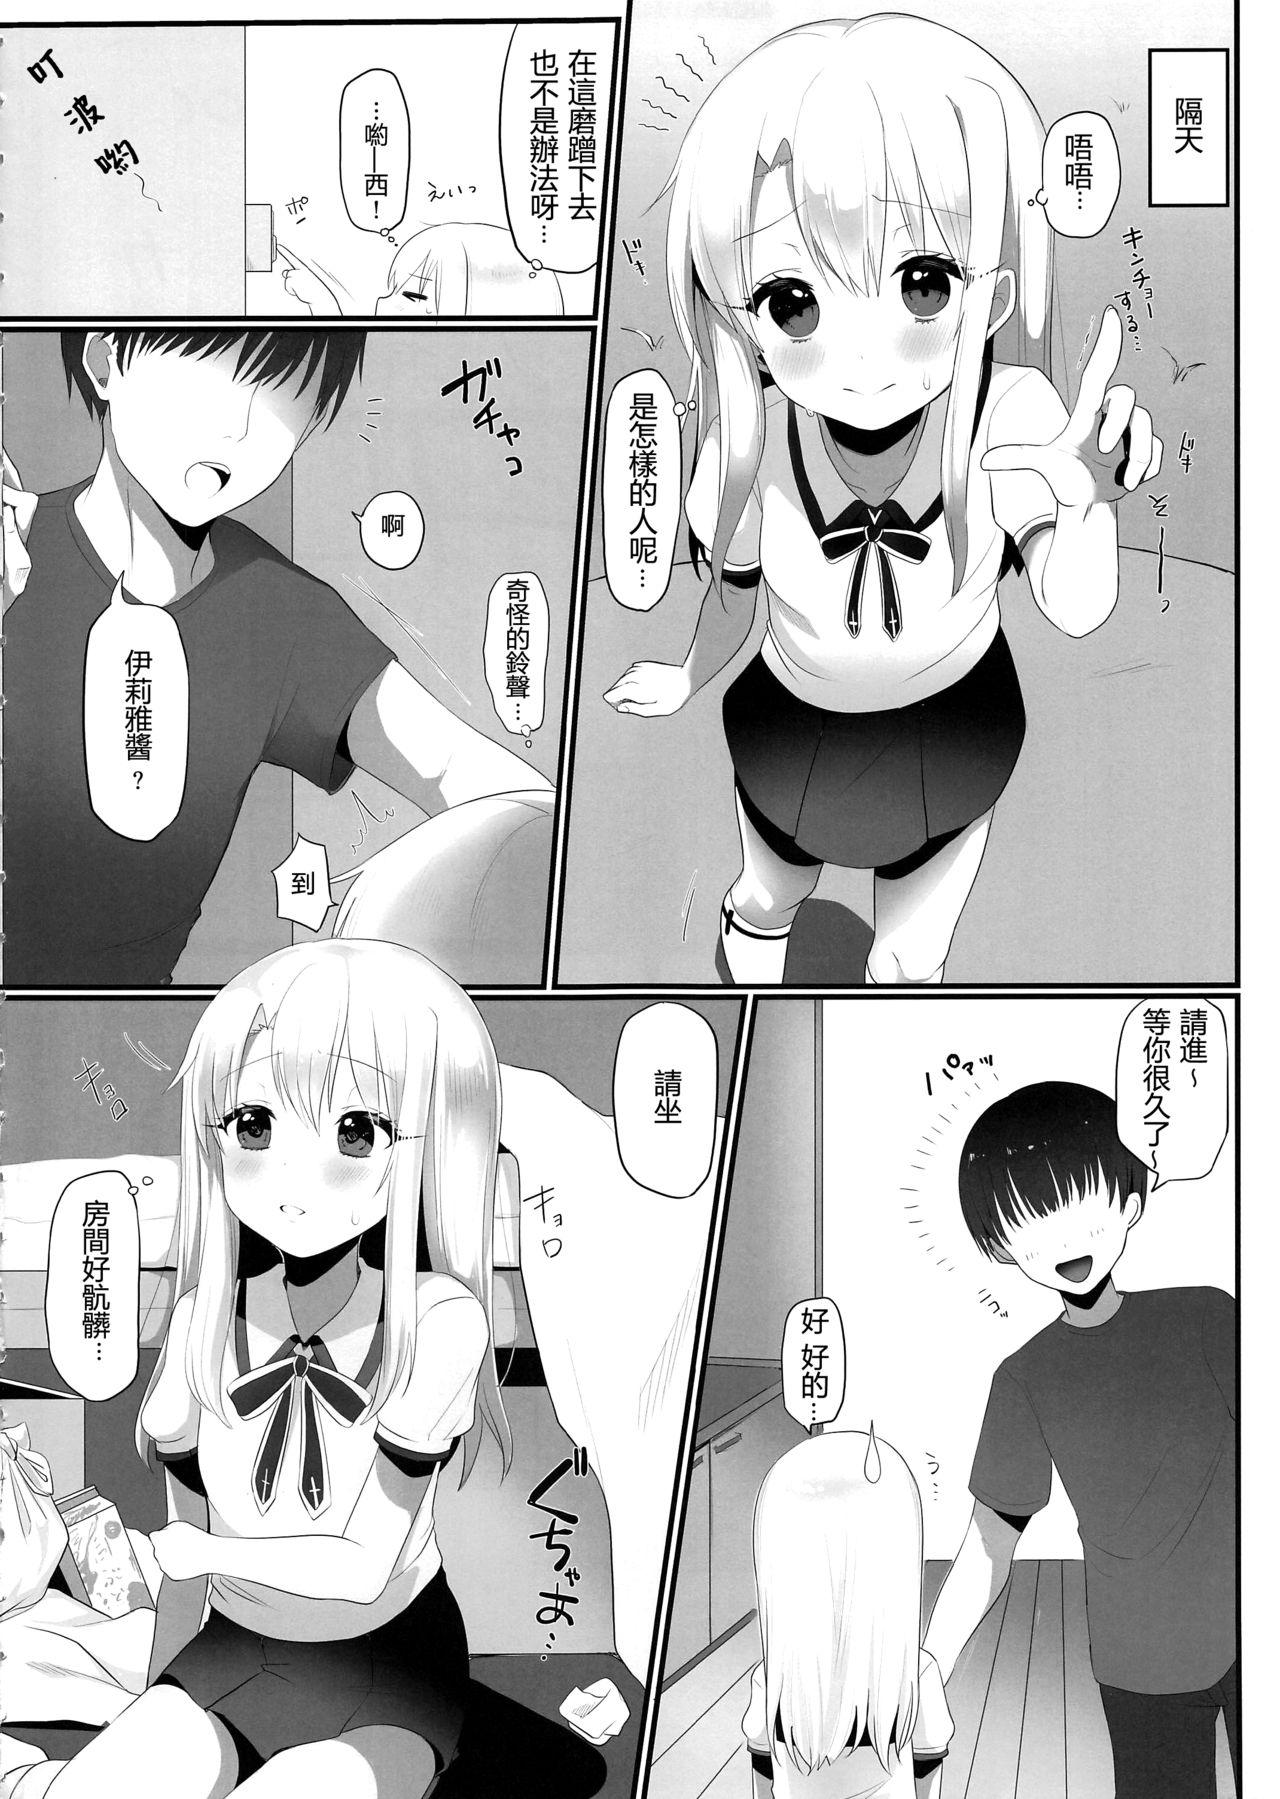 Friends Shucchou Mahou Shoujo Maid - Fate kaleid liner prisma illya Squirting - Page 8